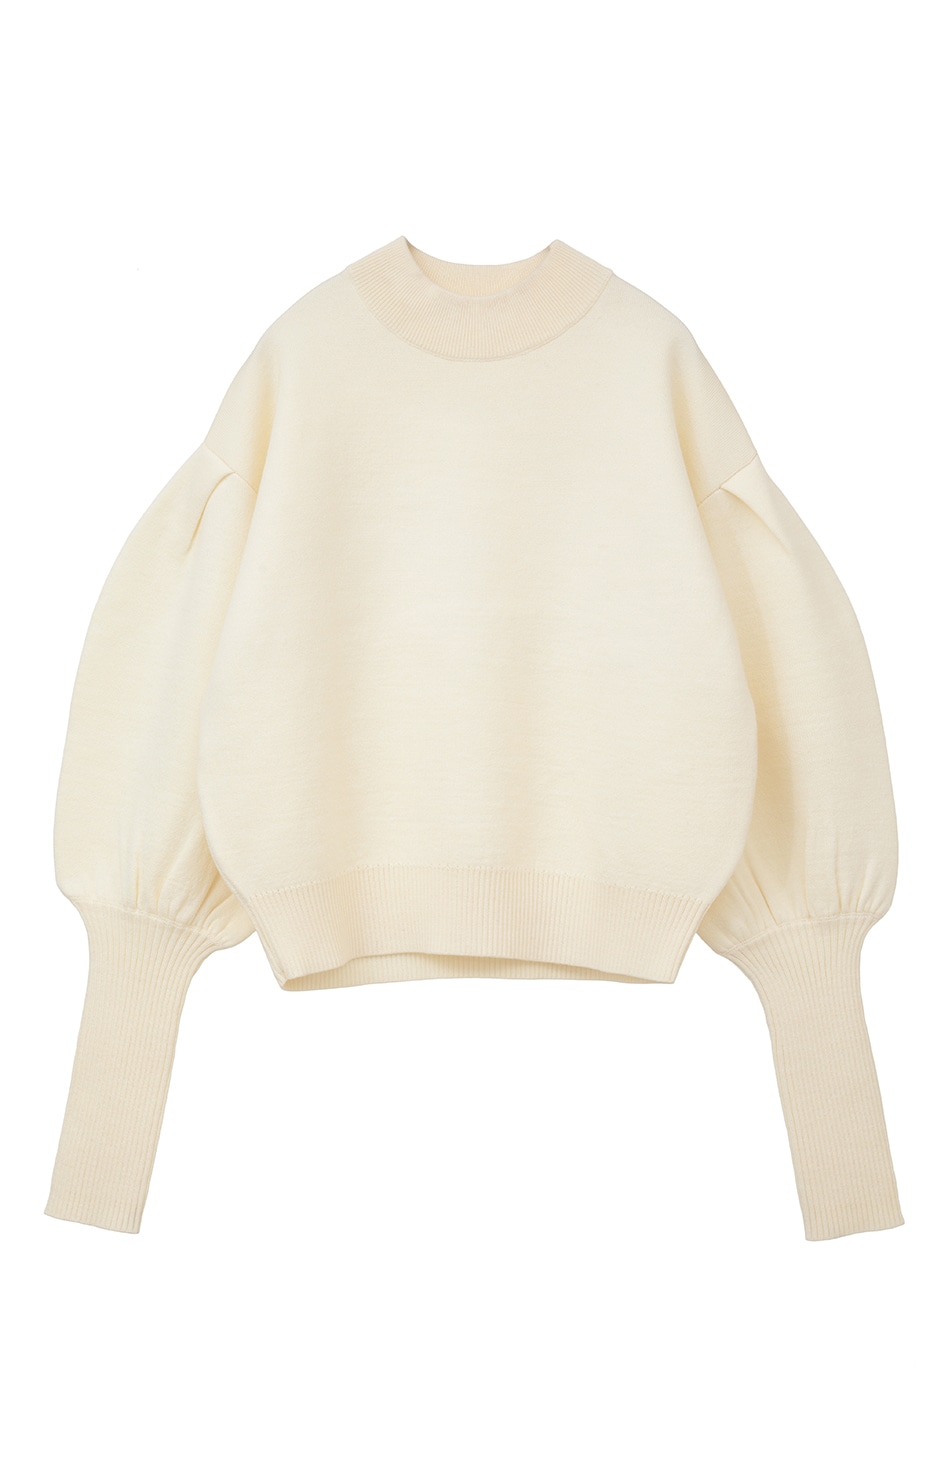 BALOON SLEEVE KNIT｜TOPS(トップス)｜CLANE OFFICIAL ONLINE STORE